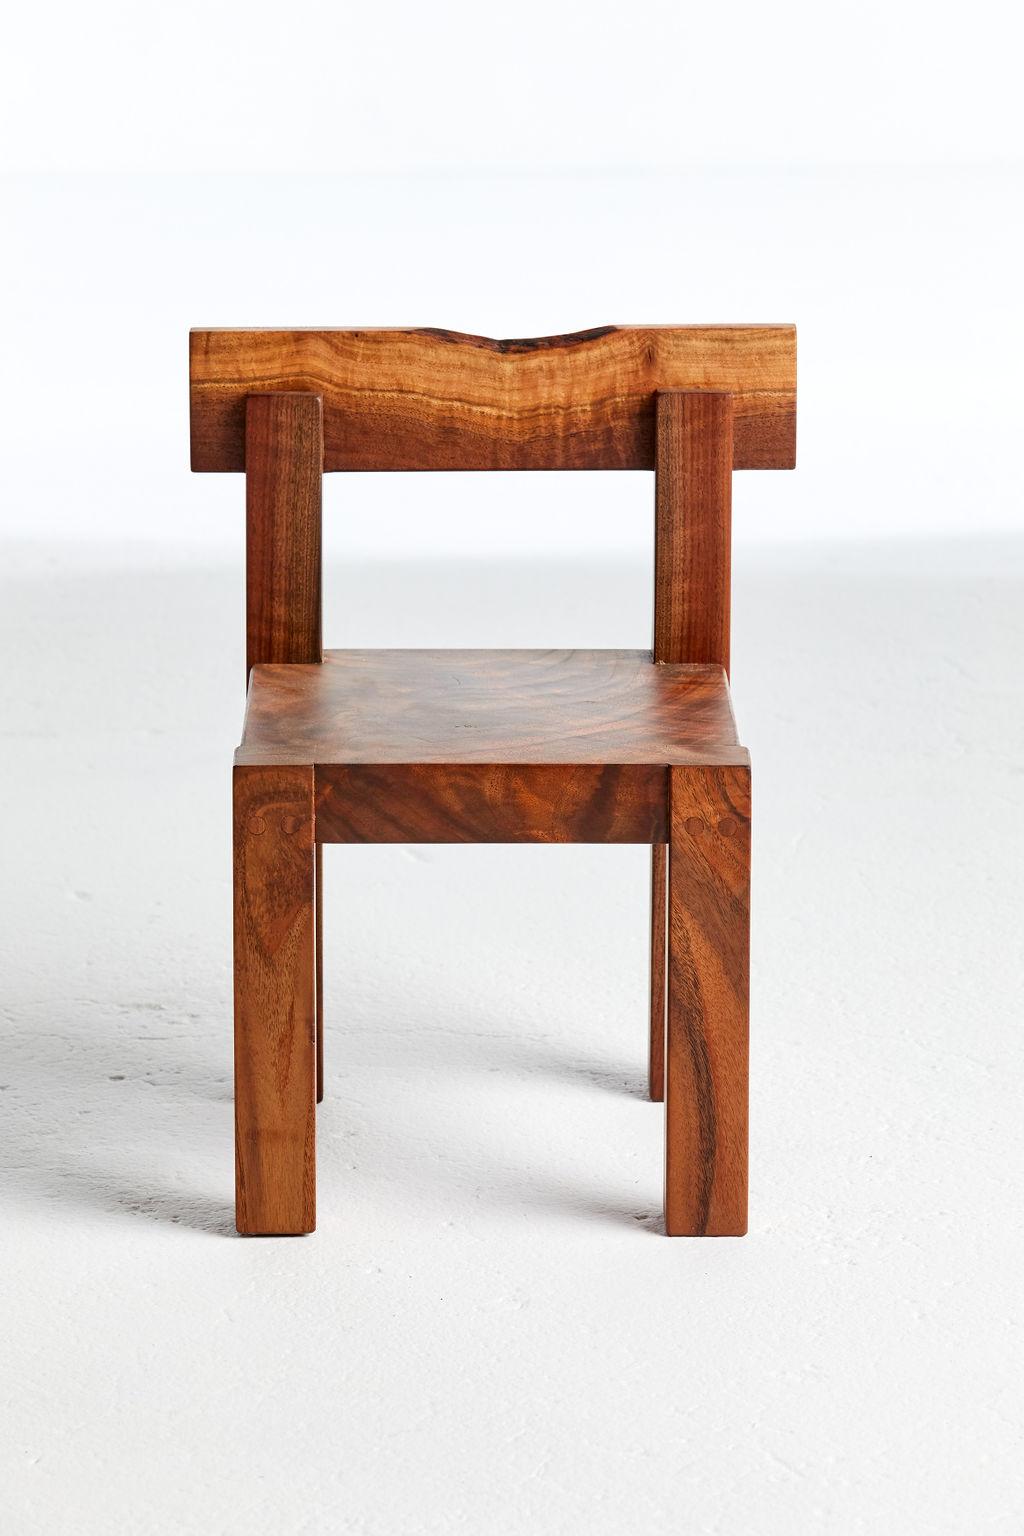 The Chloe chairs are all constructed in claro walnut which comes from central California. This wood is unique and exclusive to California. Ranging in tones and figuring, this wood is very unique and the reason I choose for these kids chairs. I want